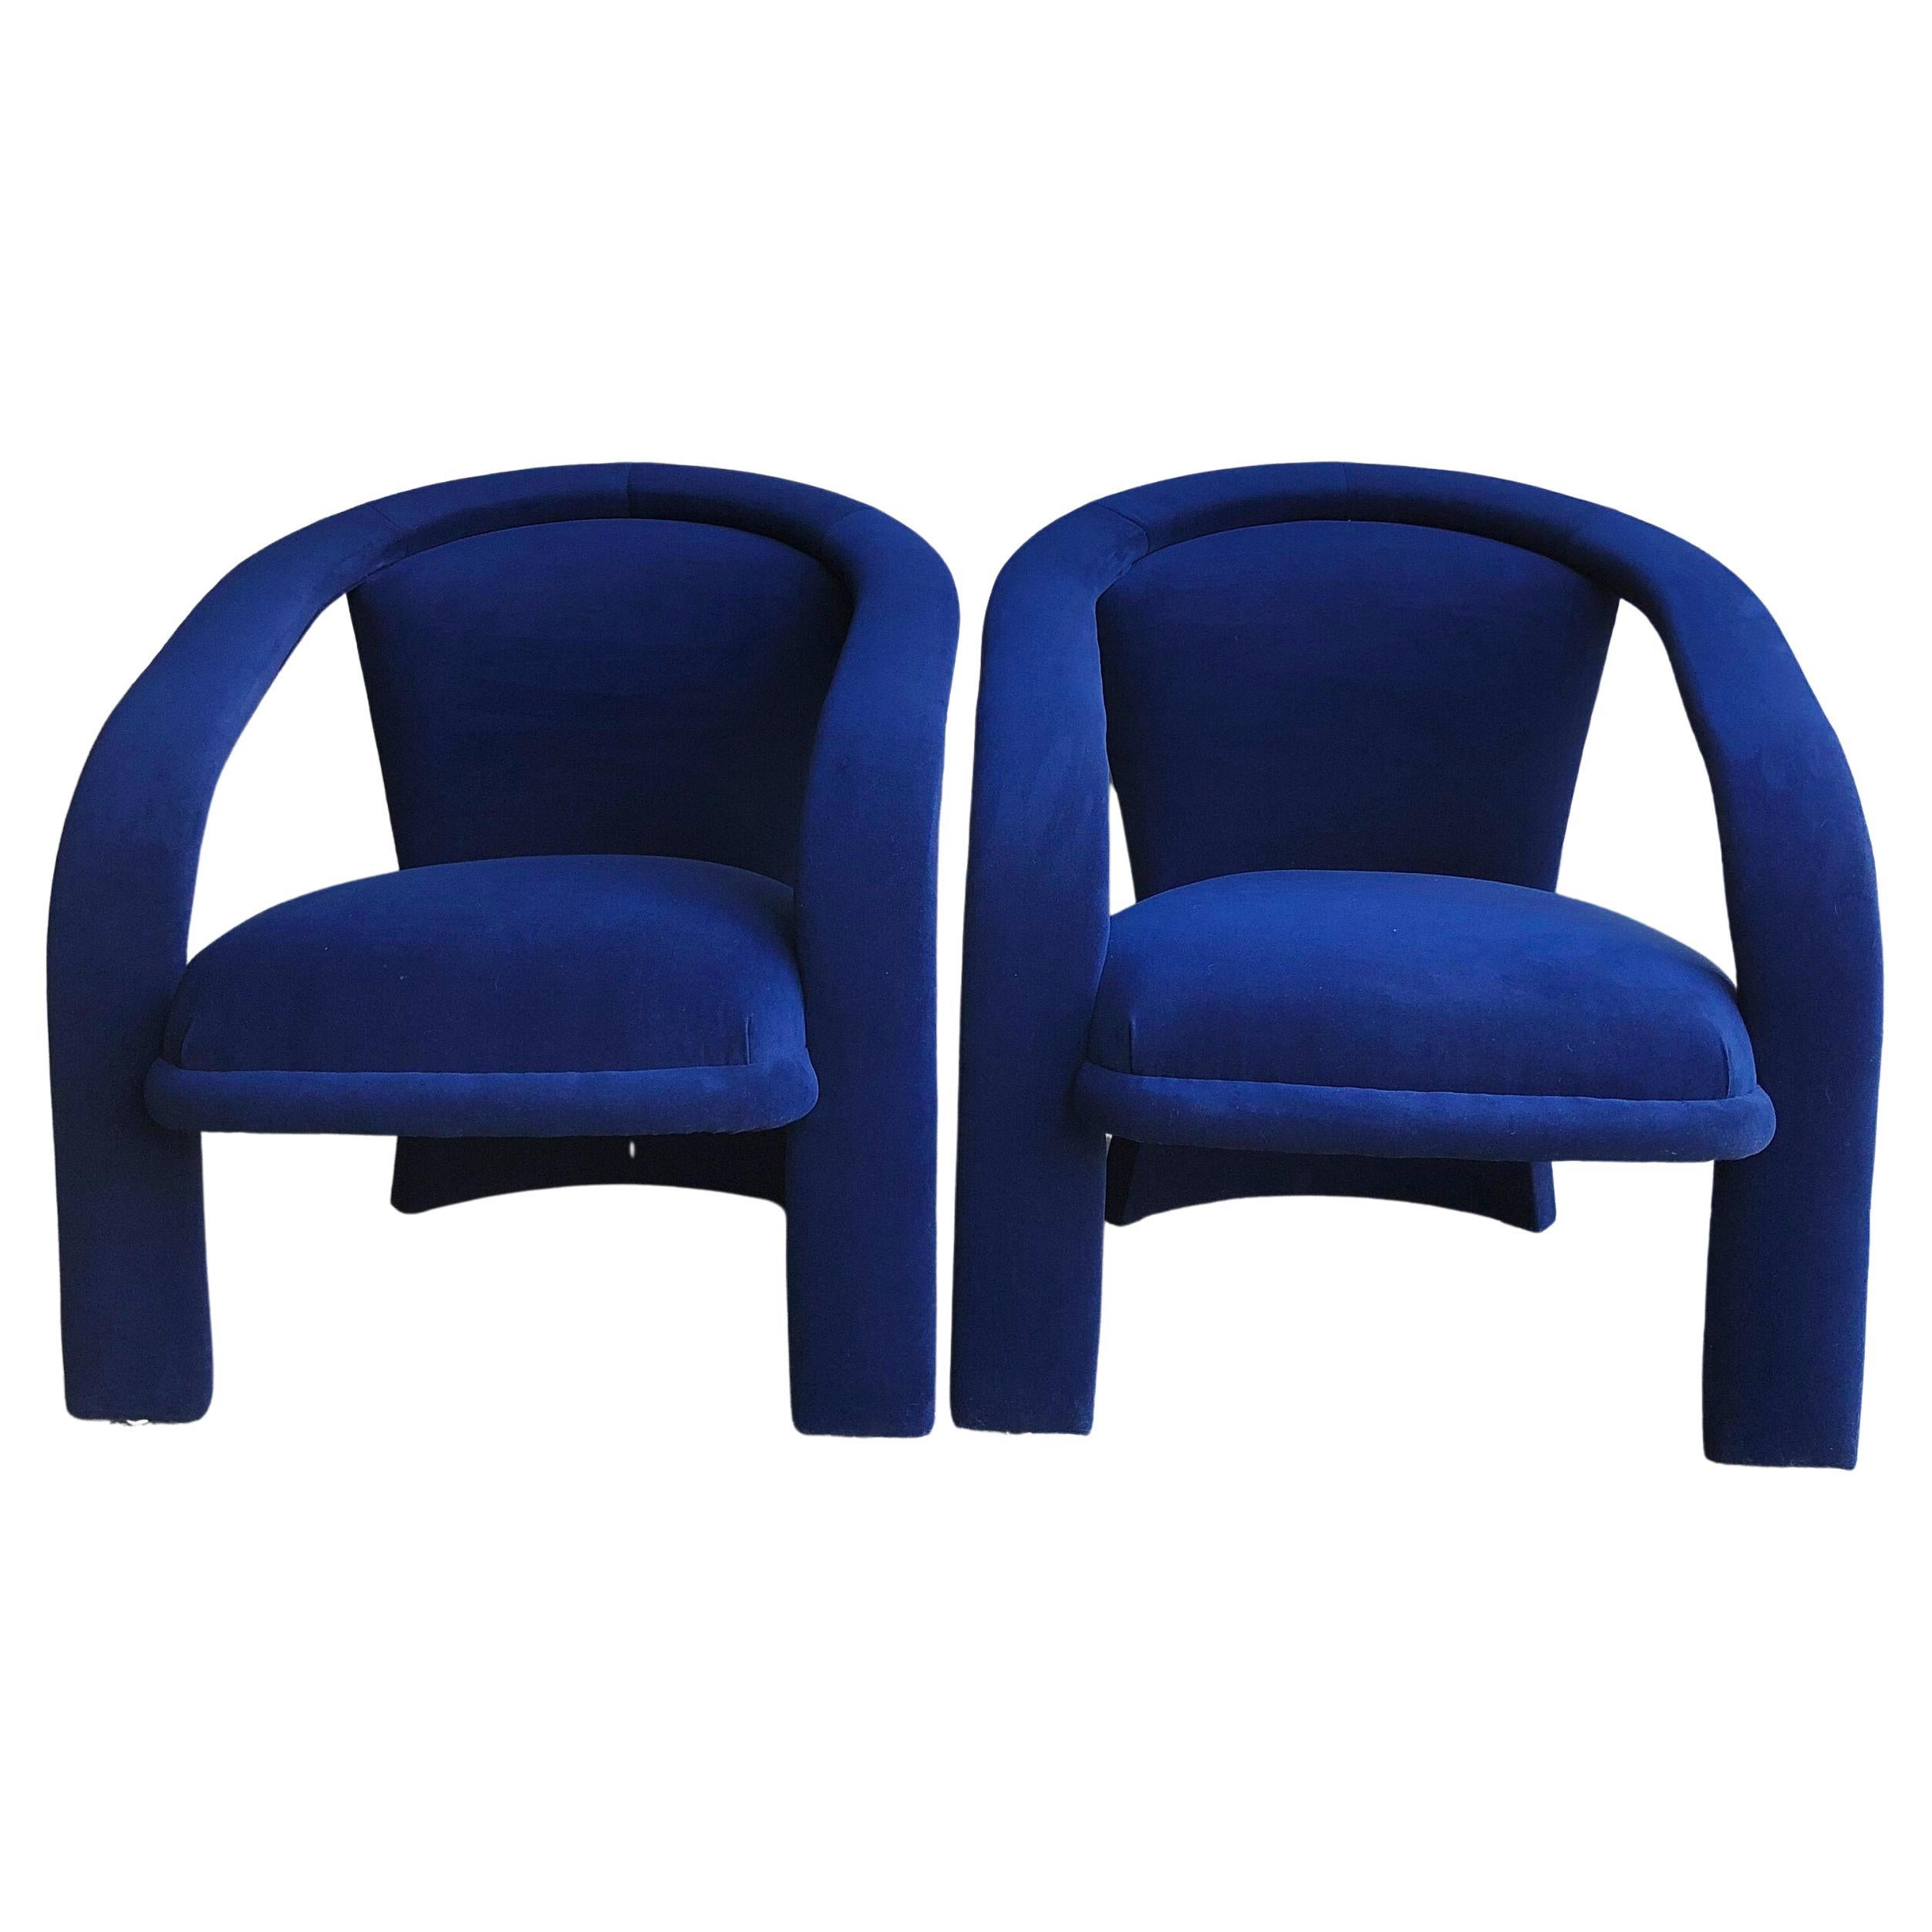 Sculptural Post Modern Armchairs After Marge Carson in New Cotton Indigo Velvet